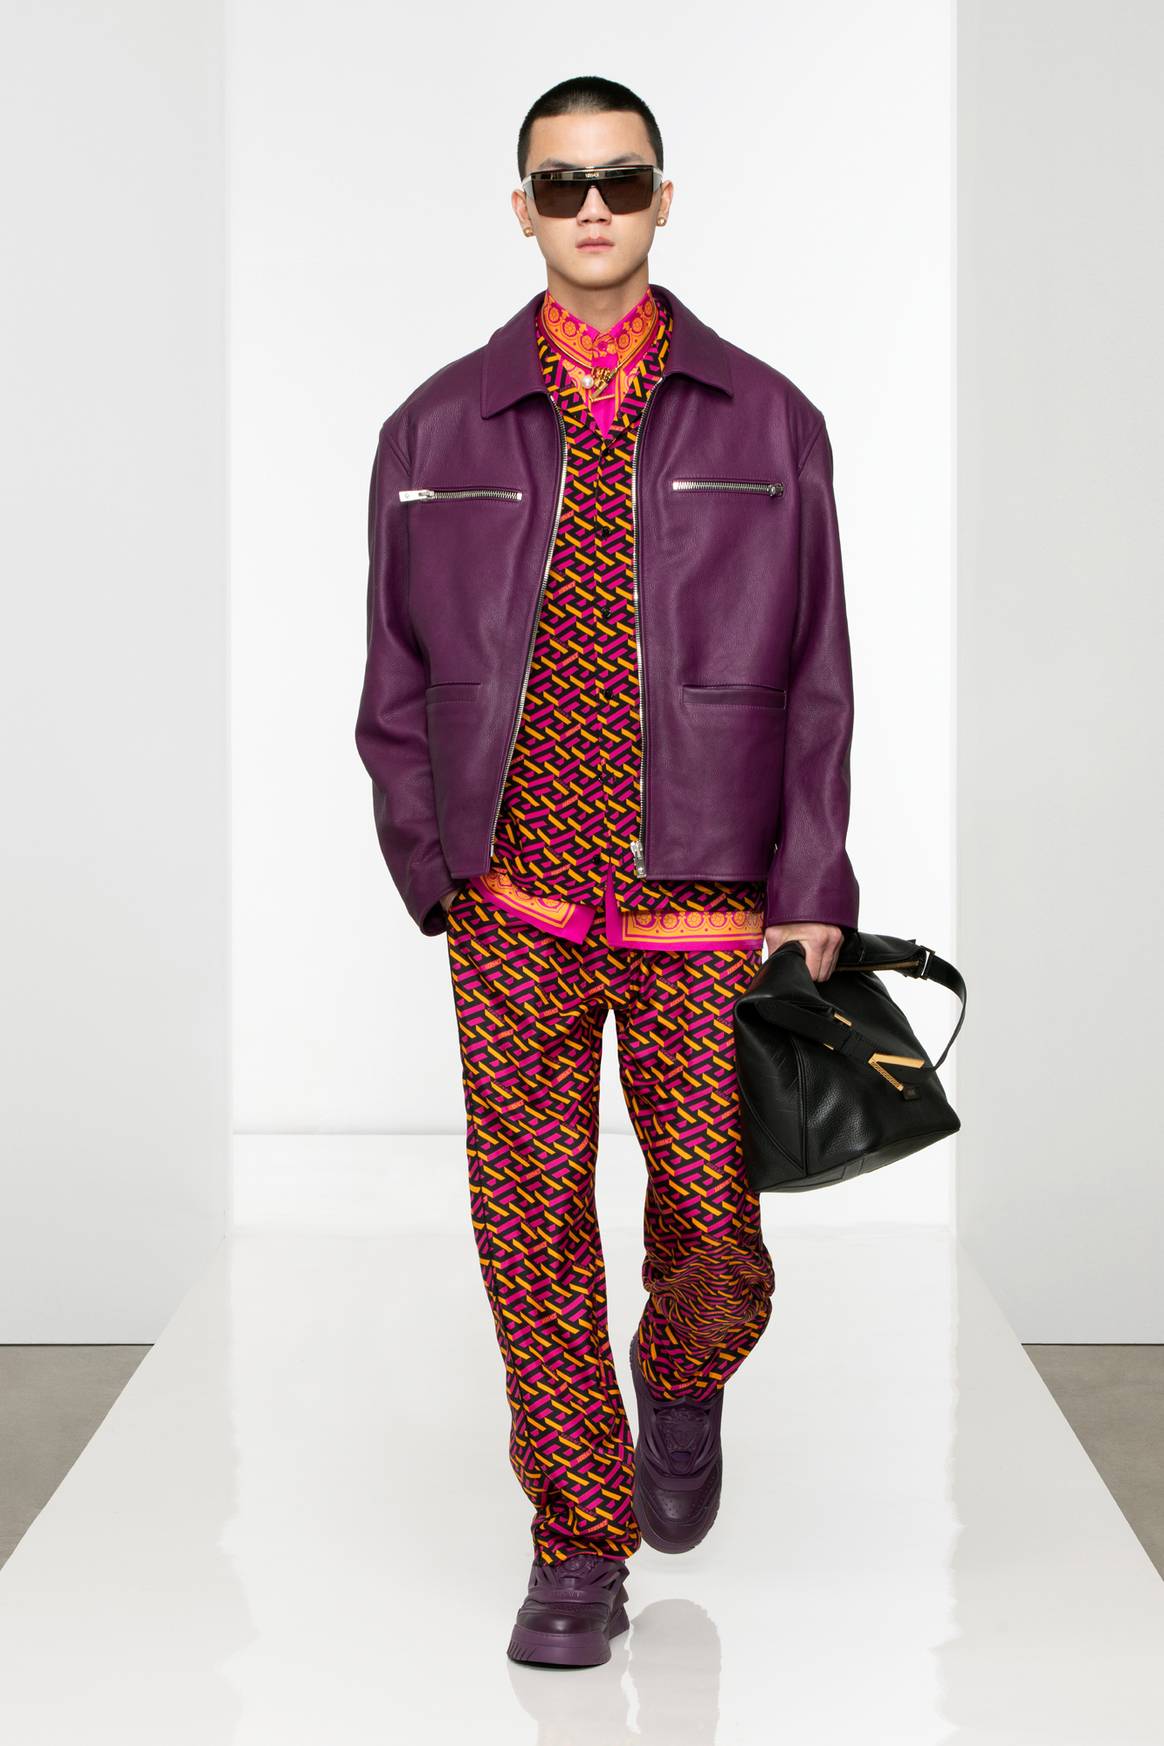 Versace Men's Collection, FW22, courtesy of the brand